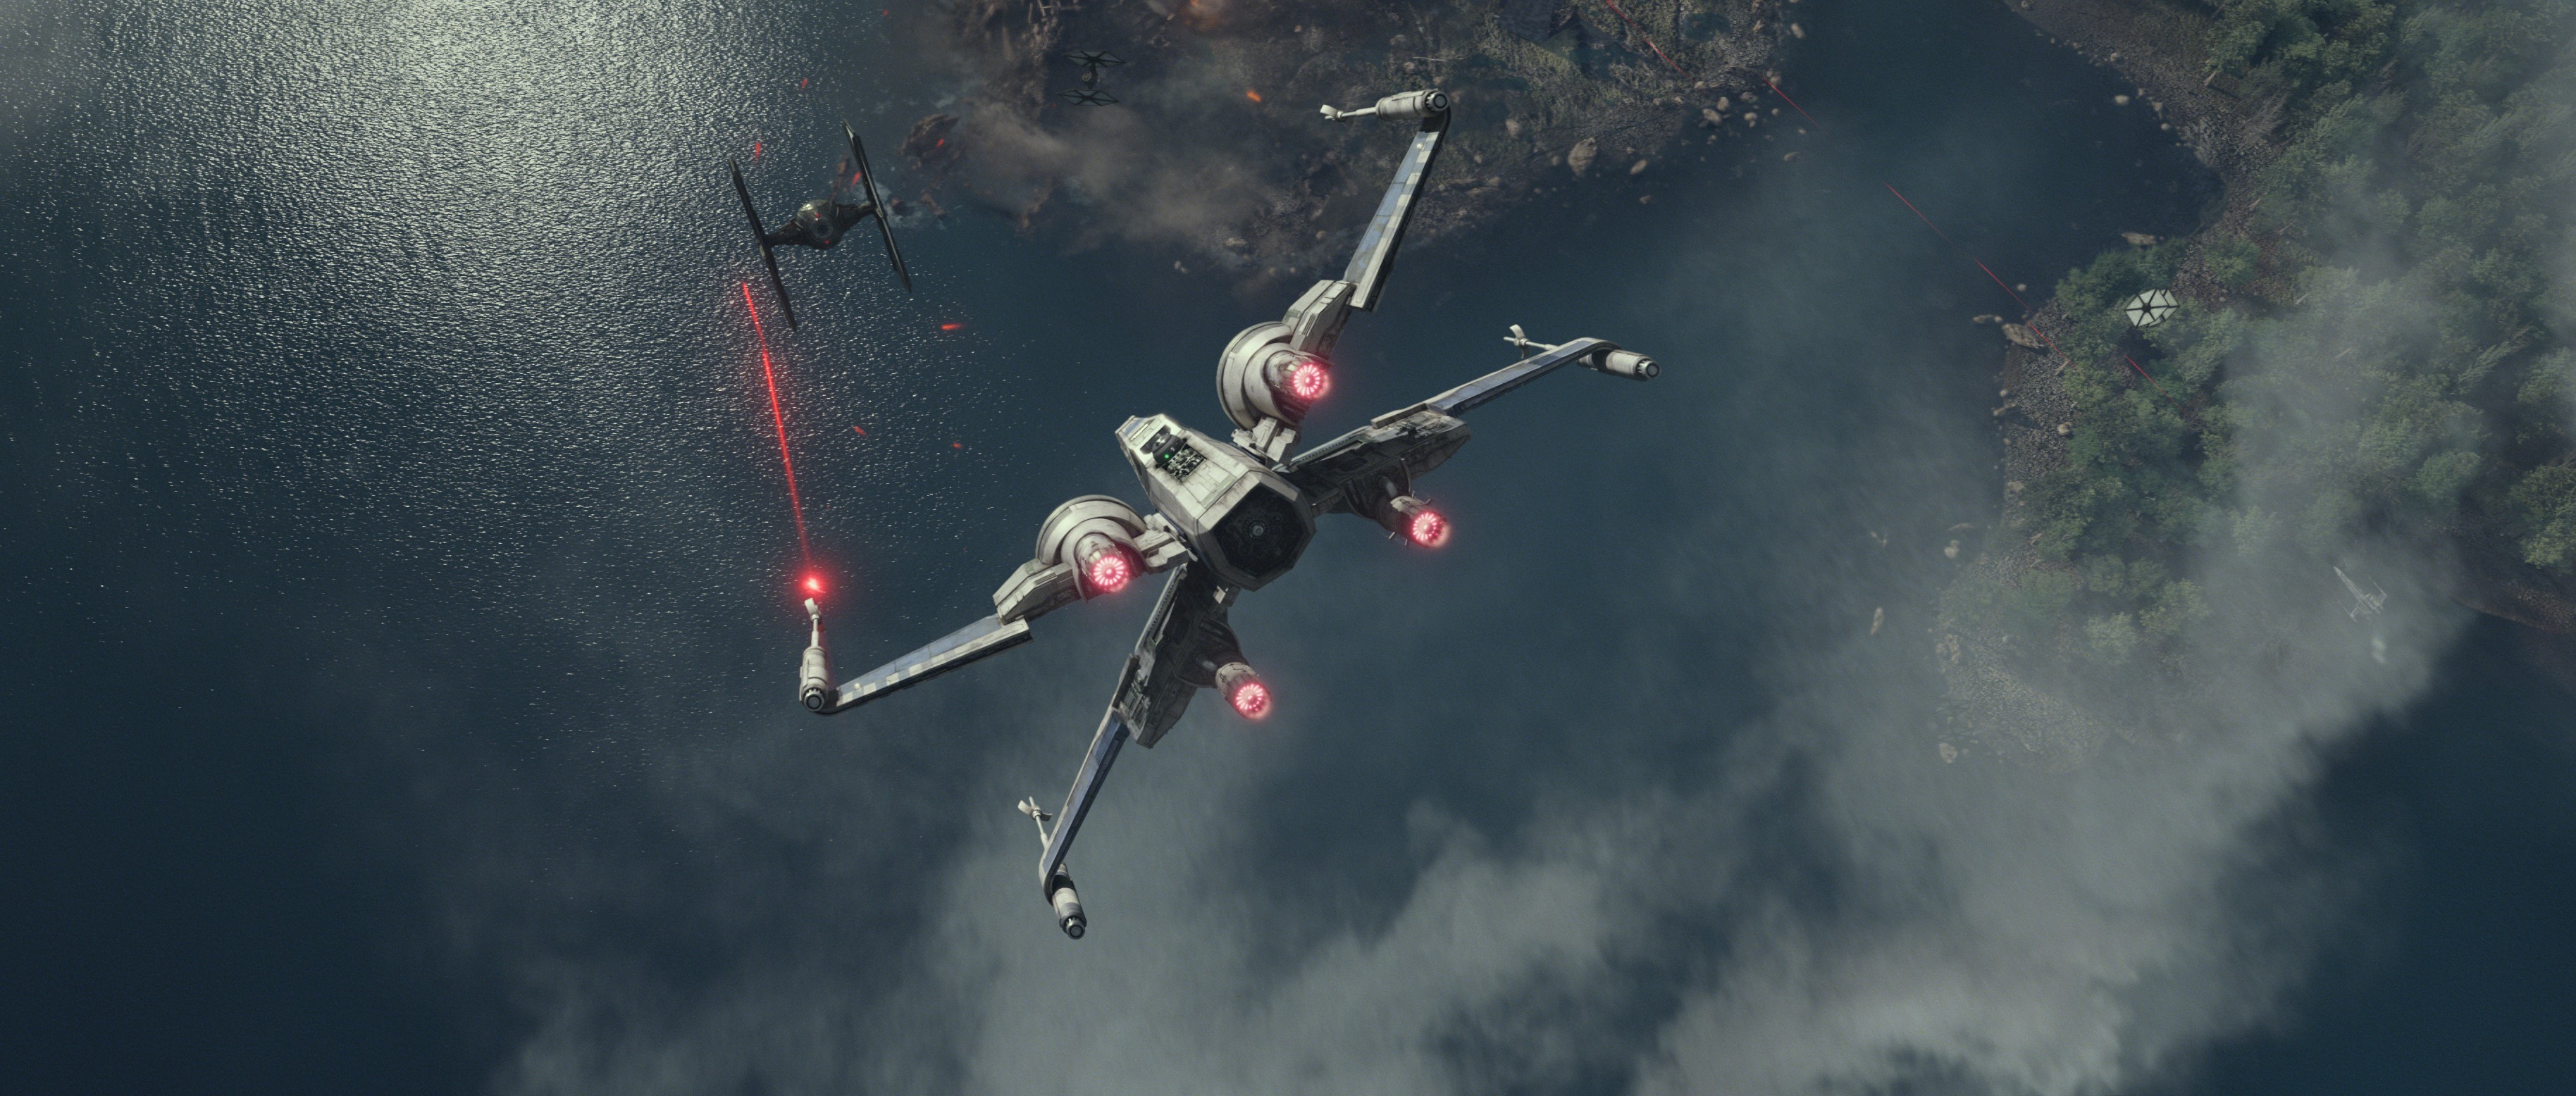 wallpapers star wars, movie, star wars episode vii: the force awakens, tie fighter, x wing